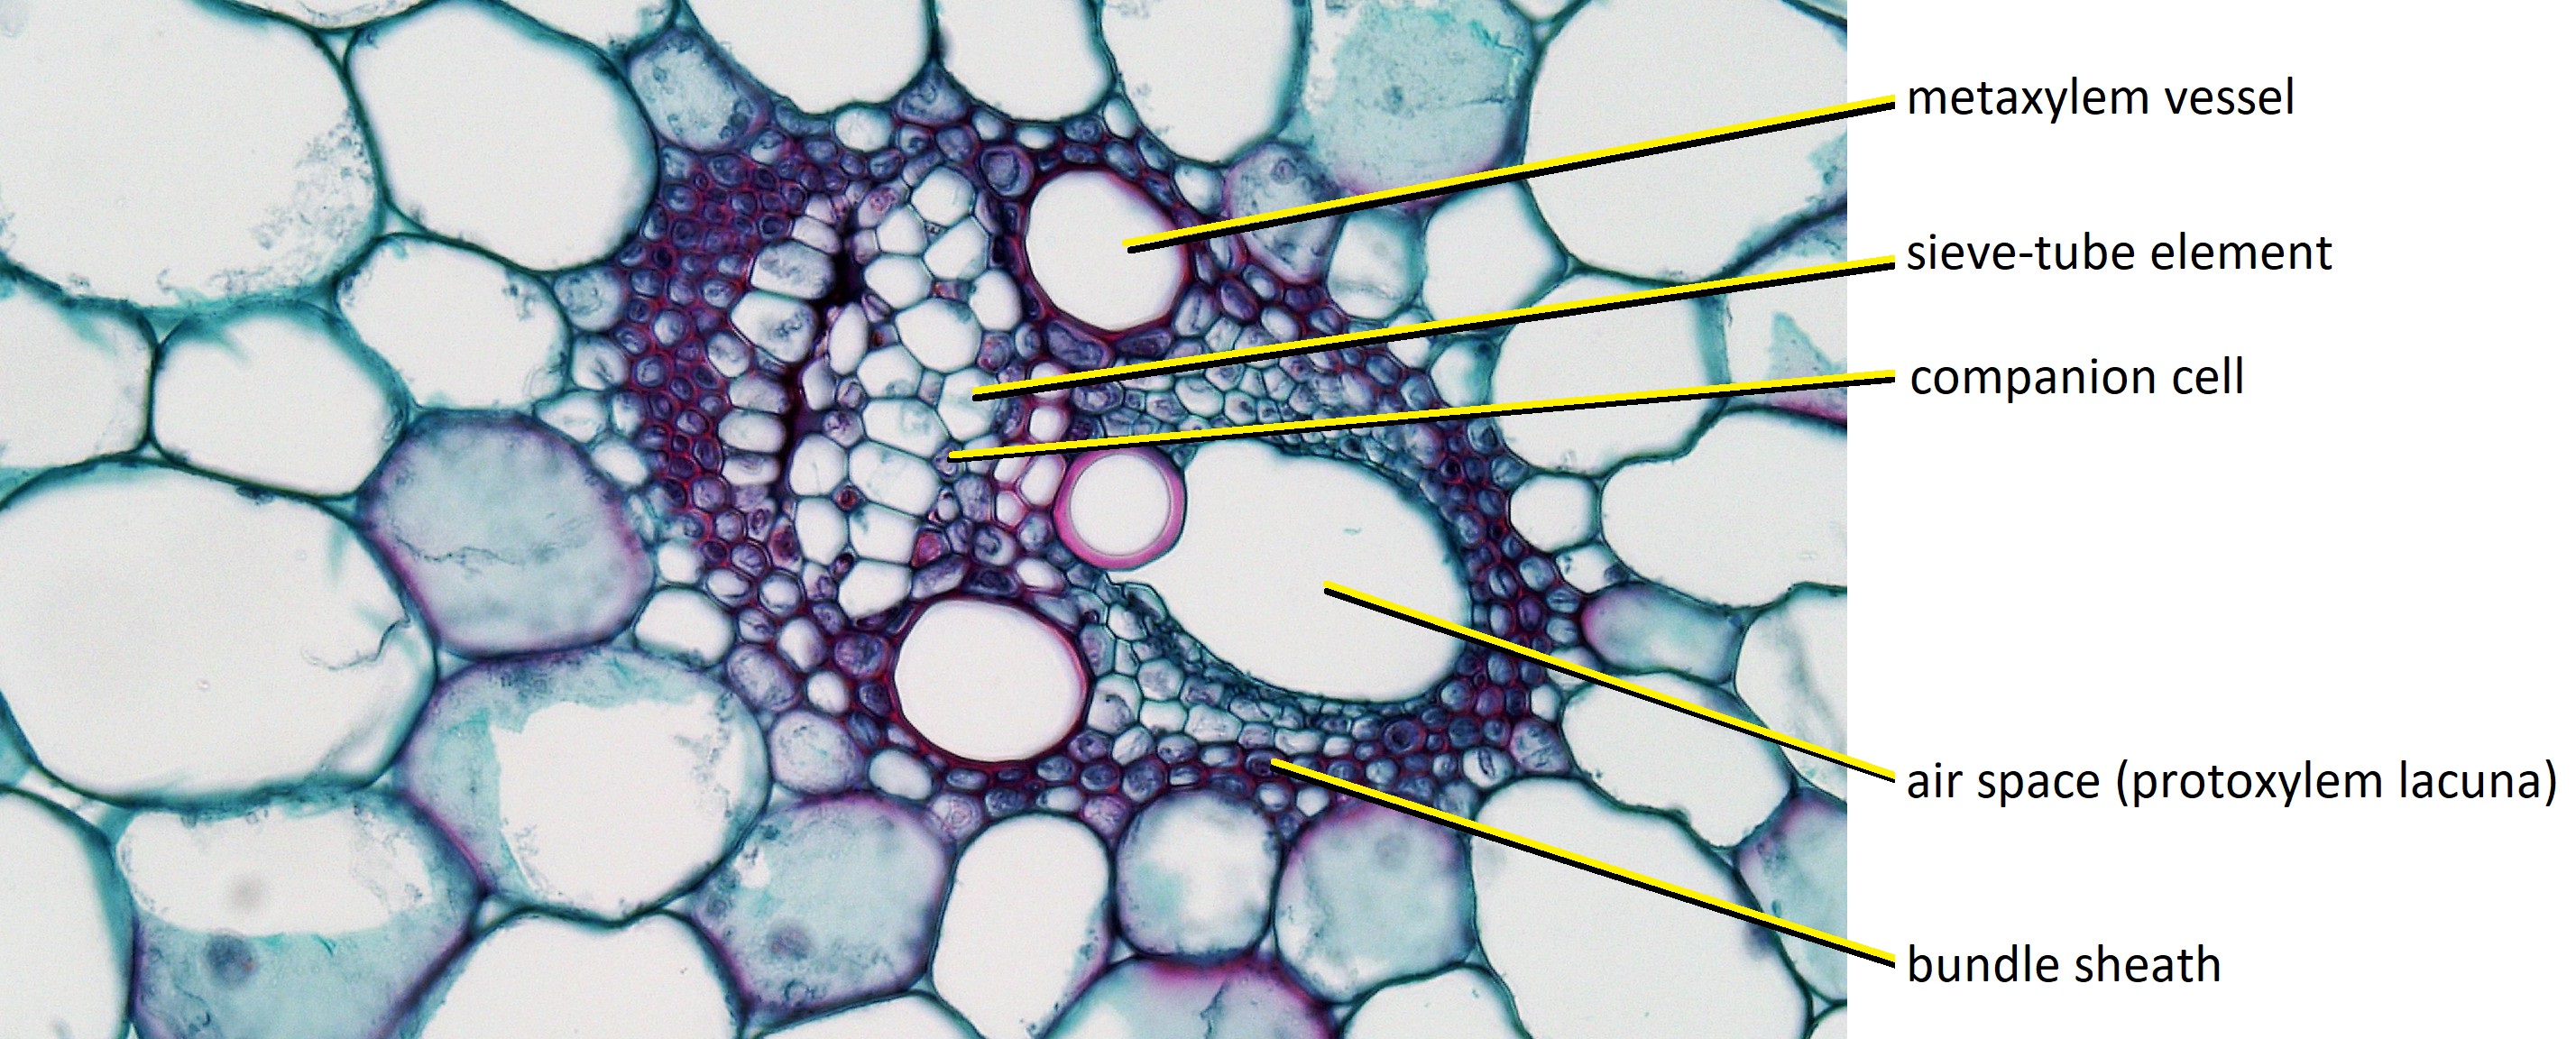 A close-up view of a vascular bundle in a corn stem, showing conducting elements of the xylem and phloem